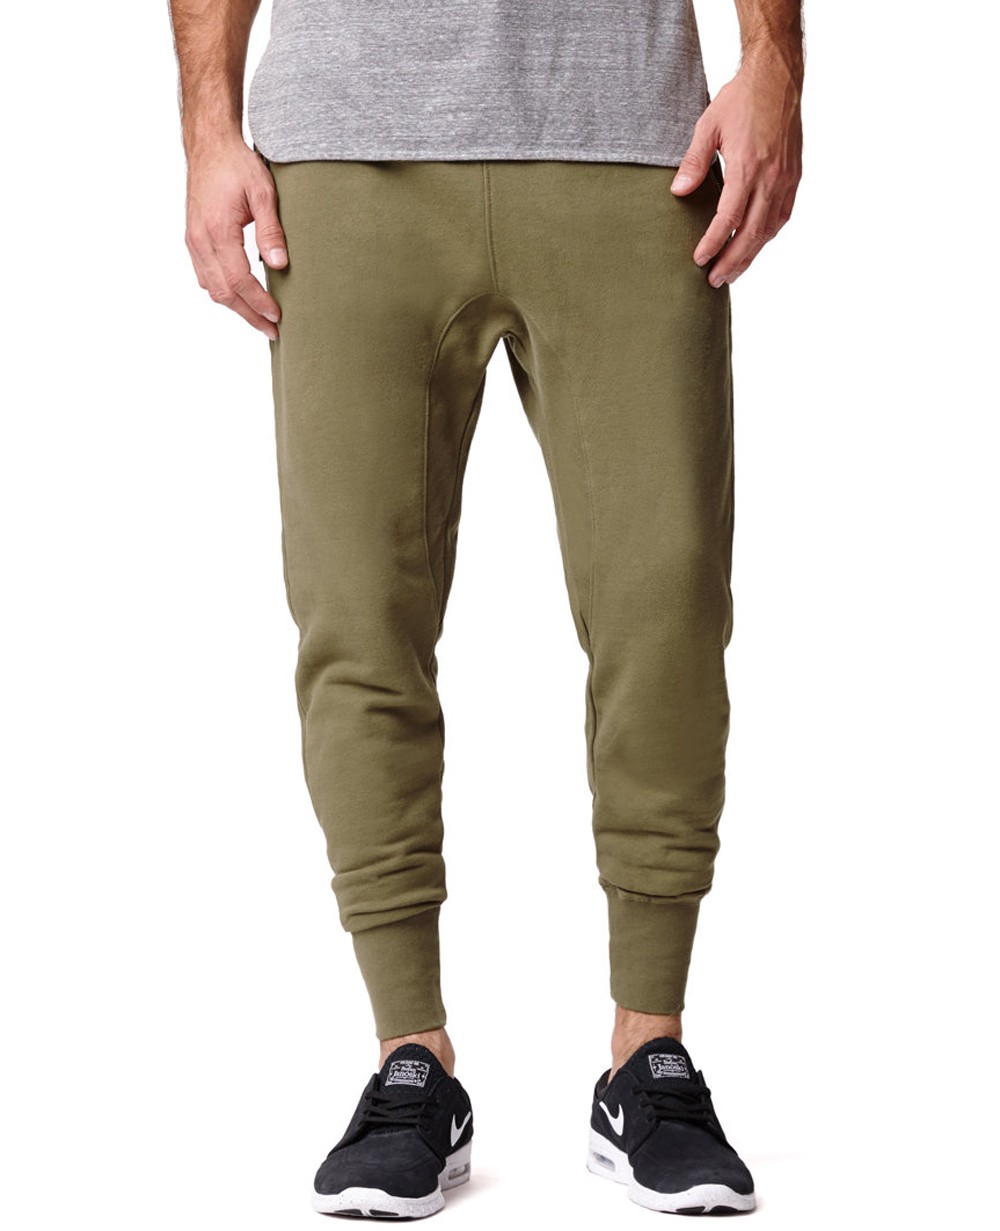 Olive Green Joggers, R1-12605